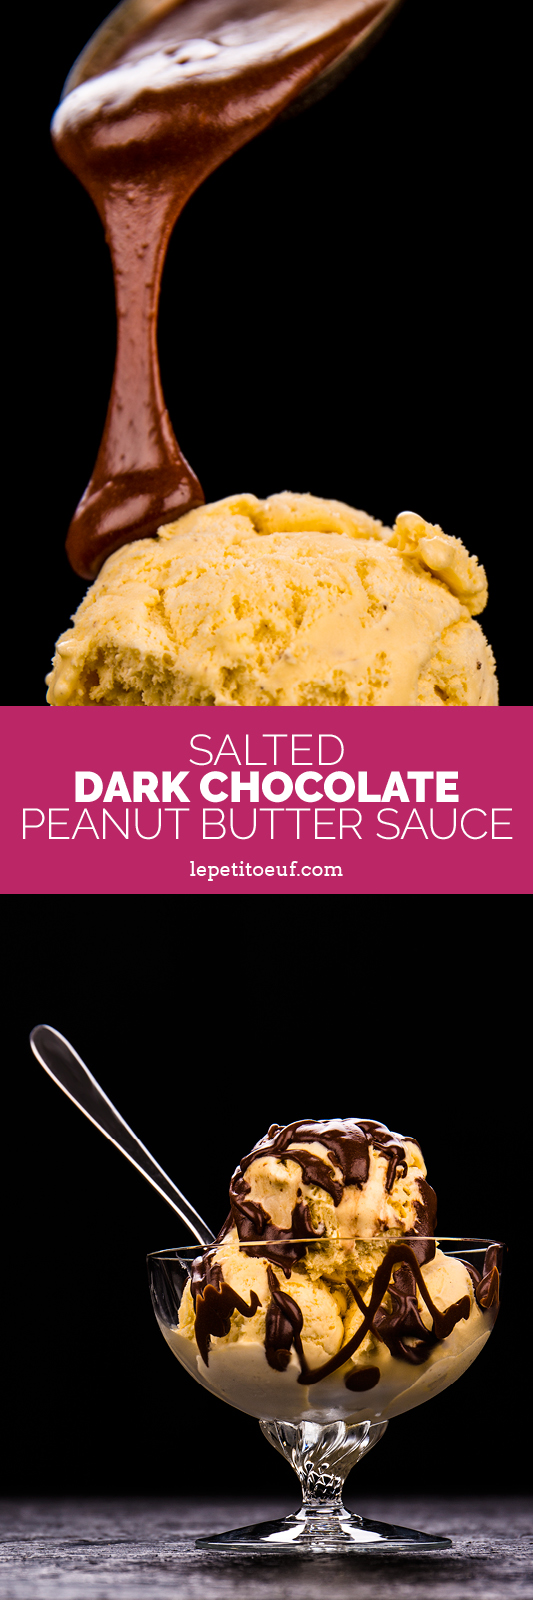 This salted dark chocolate peanut butter sauce is a rich, decadent, dairy free sauce that makes a sumptuous topping for desserts, sweets, cakes and ice creams. Featuring no refined sugar it’s made using 70% dark chocolate, plain peanut butter, salt, agave syrup and almond milk so perfect for those leading a sugar free or dairy free diet.